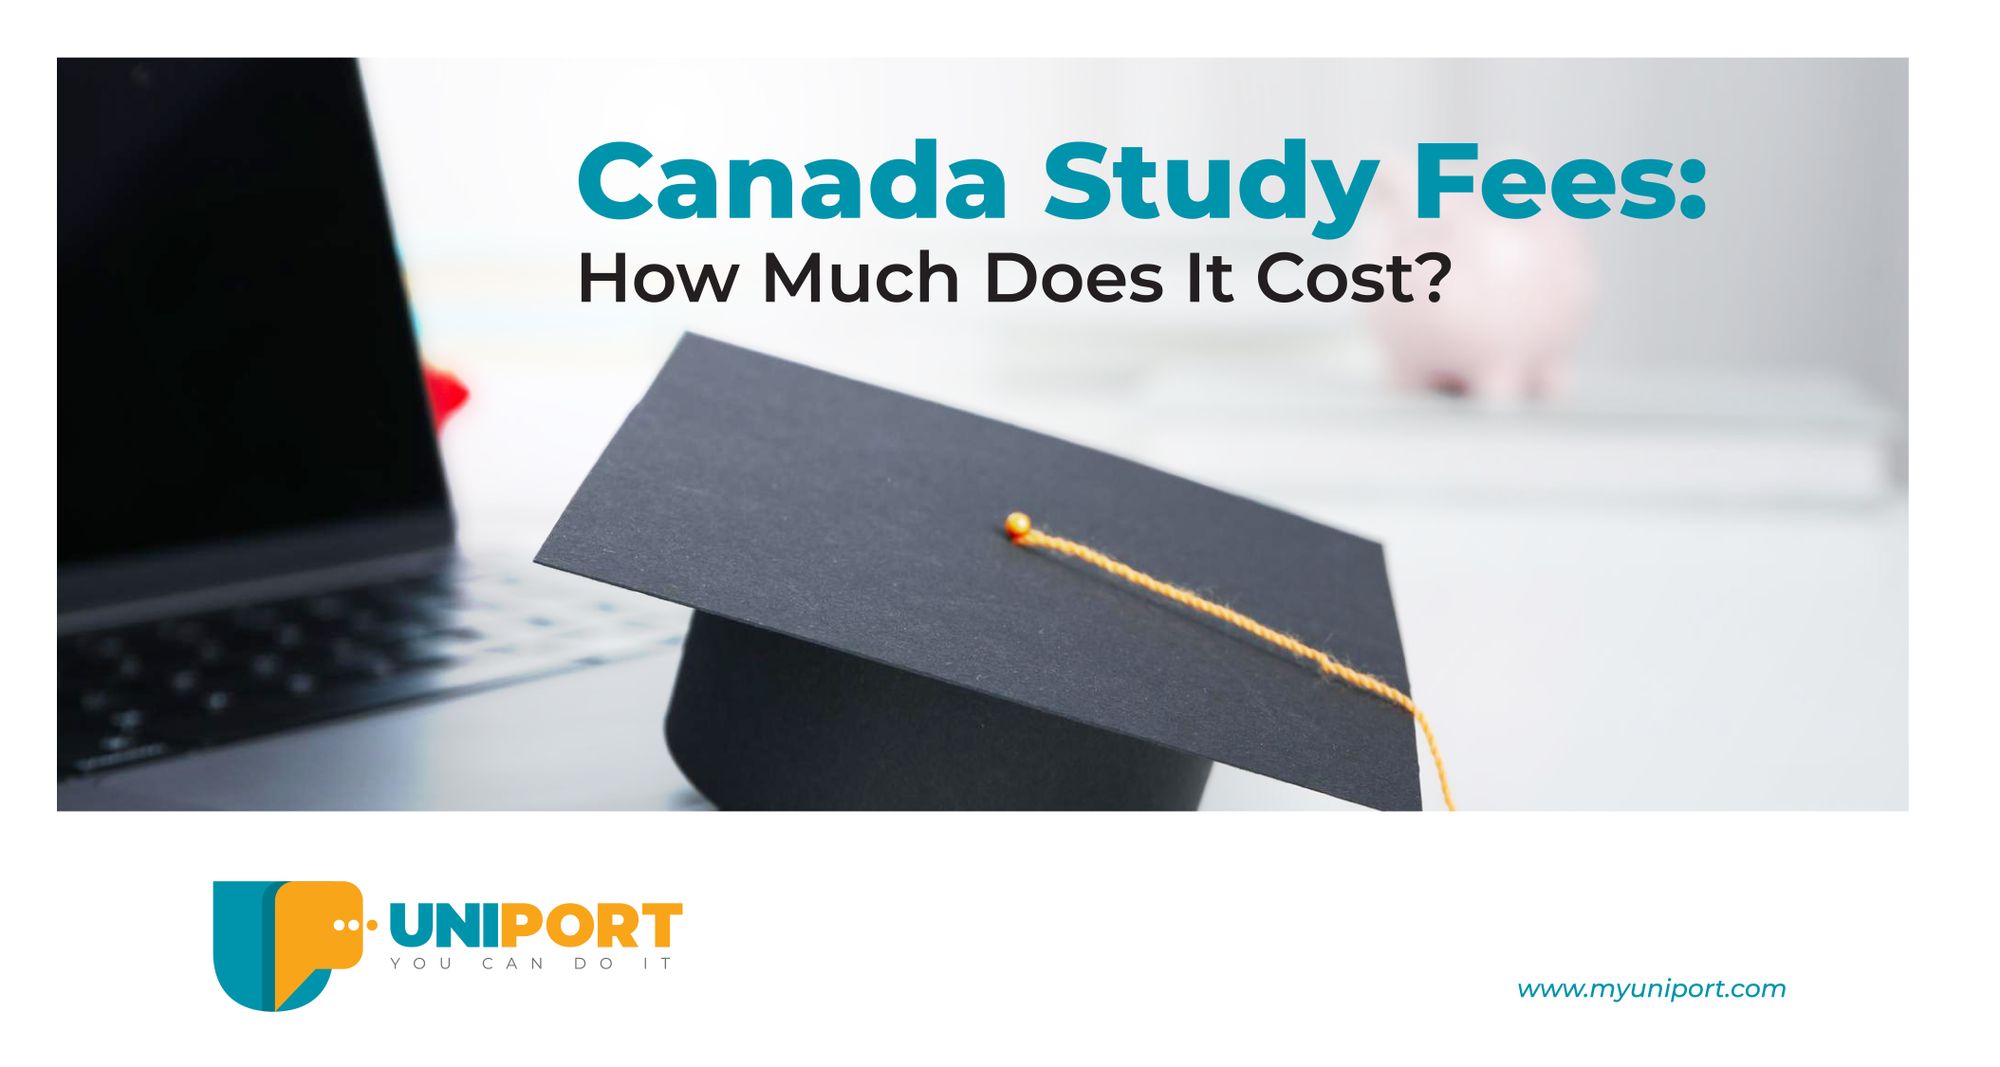 Canada Study Fees: How Much Does It Cost?